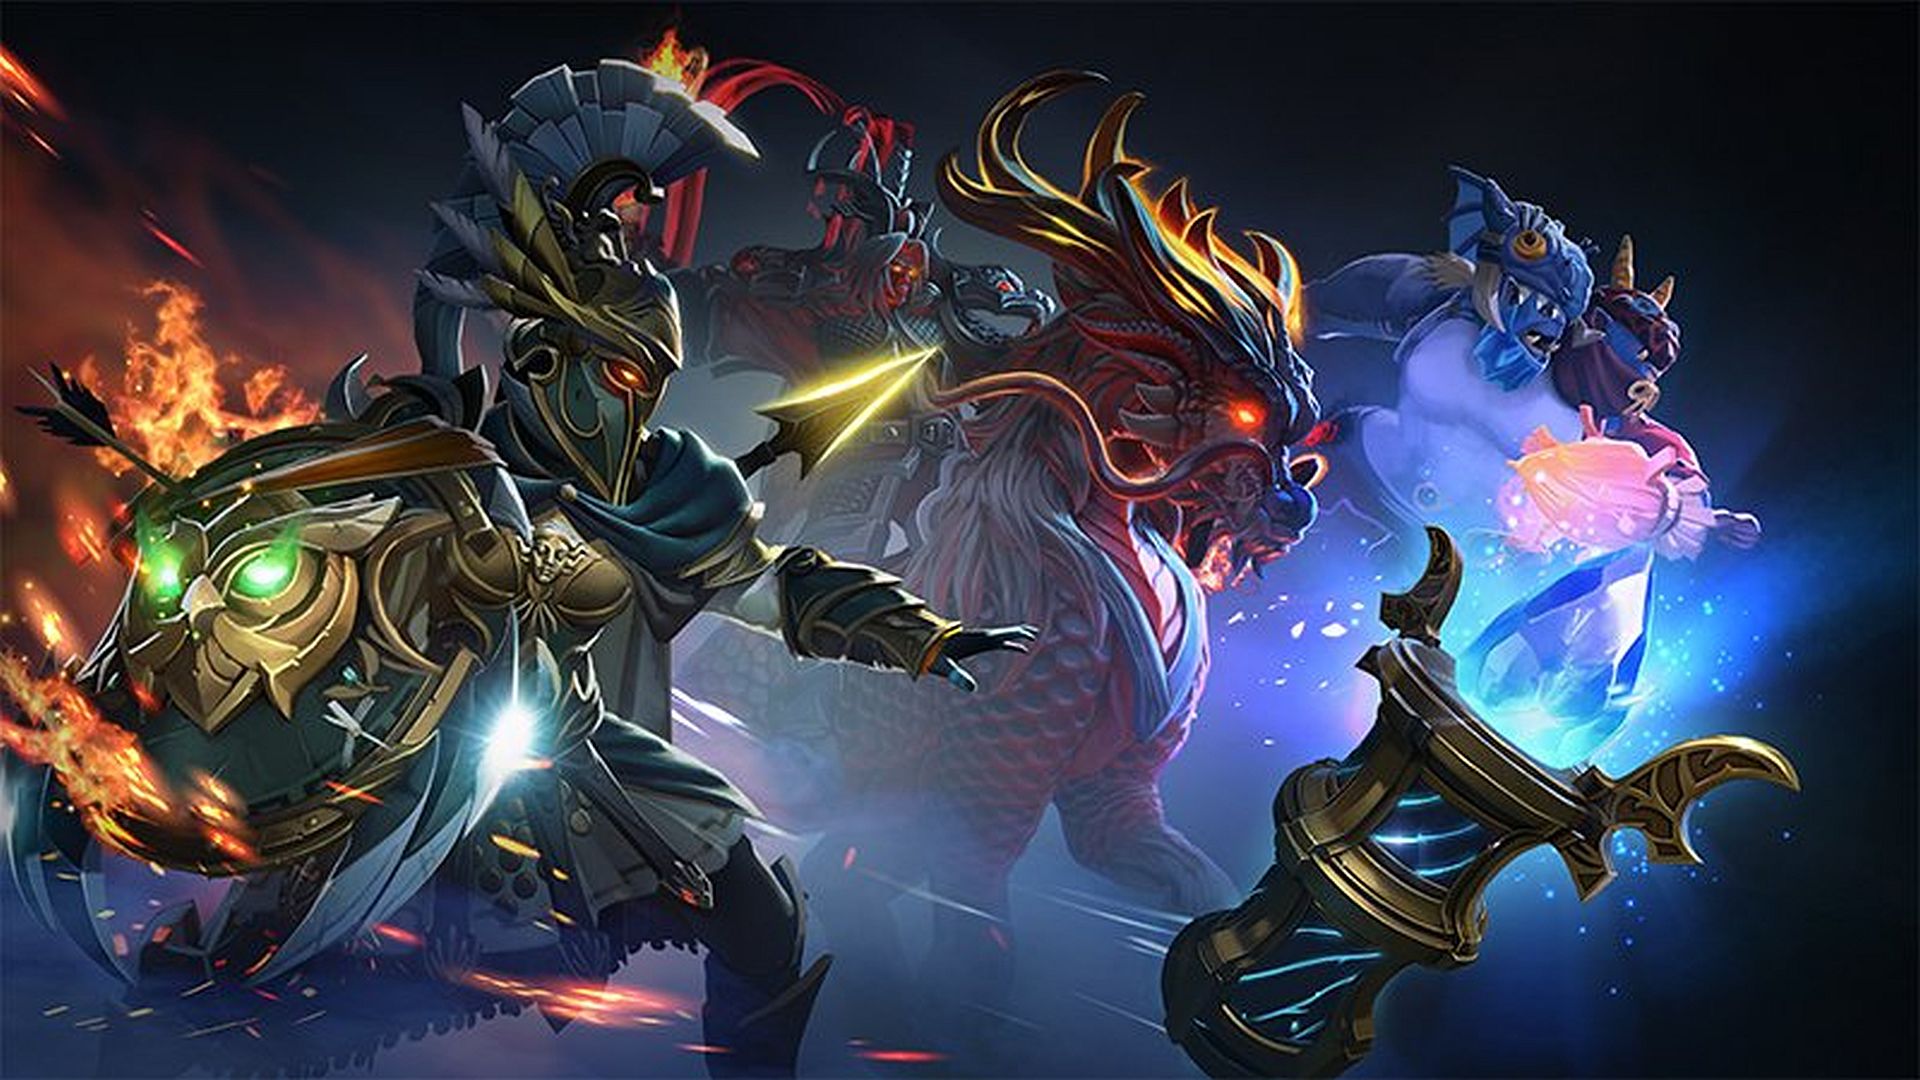 Dota 2 has just hit its biggest peak player count in over a year and a half | PCGamesN